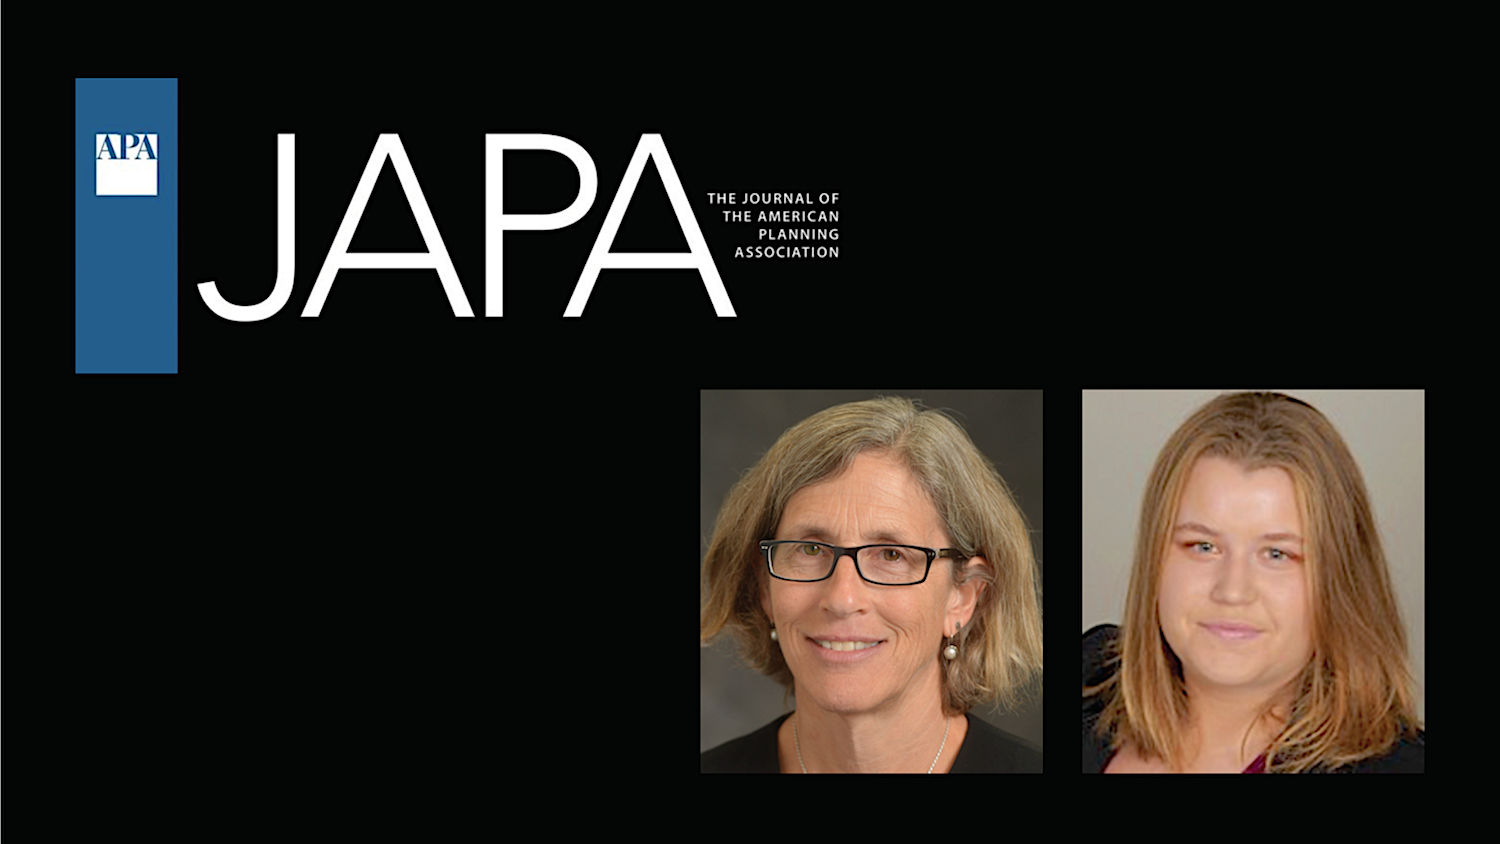 Planning Association journal logo and headshots of two women